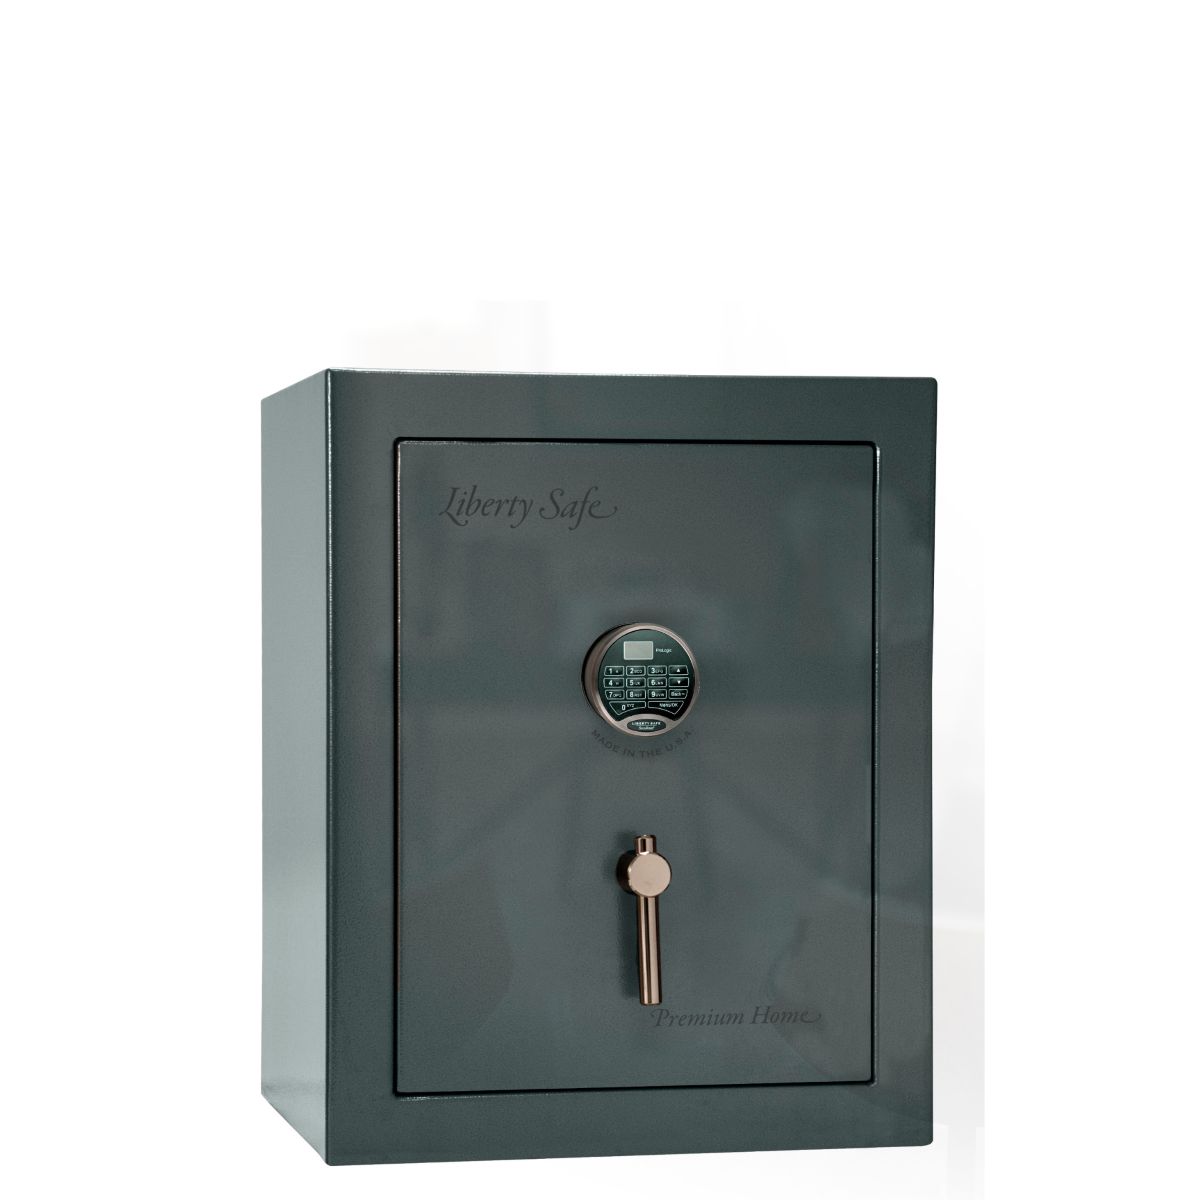 Premium Home Series | Level 7 Security | 2 Hour Fire Protection | 08 | Dimensions: 30"(H) x 24"(W) x 20.25"(D) | Forest Mist Gloss - Closed Door